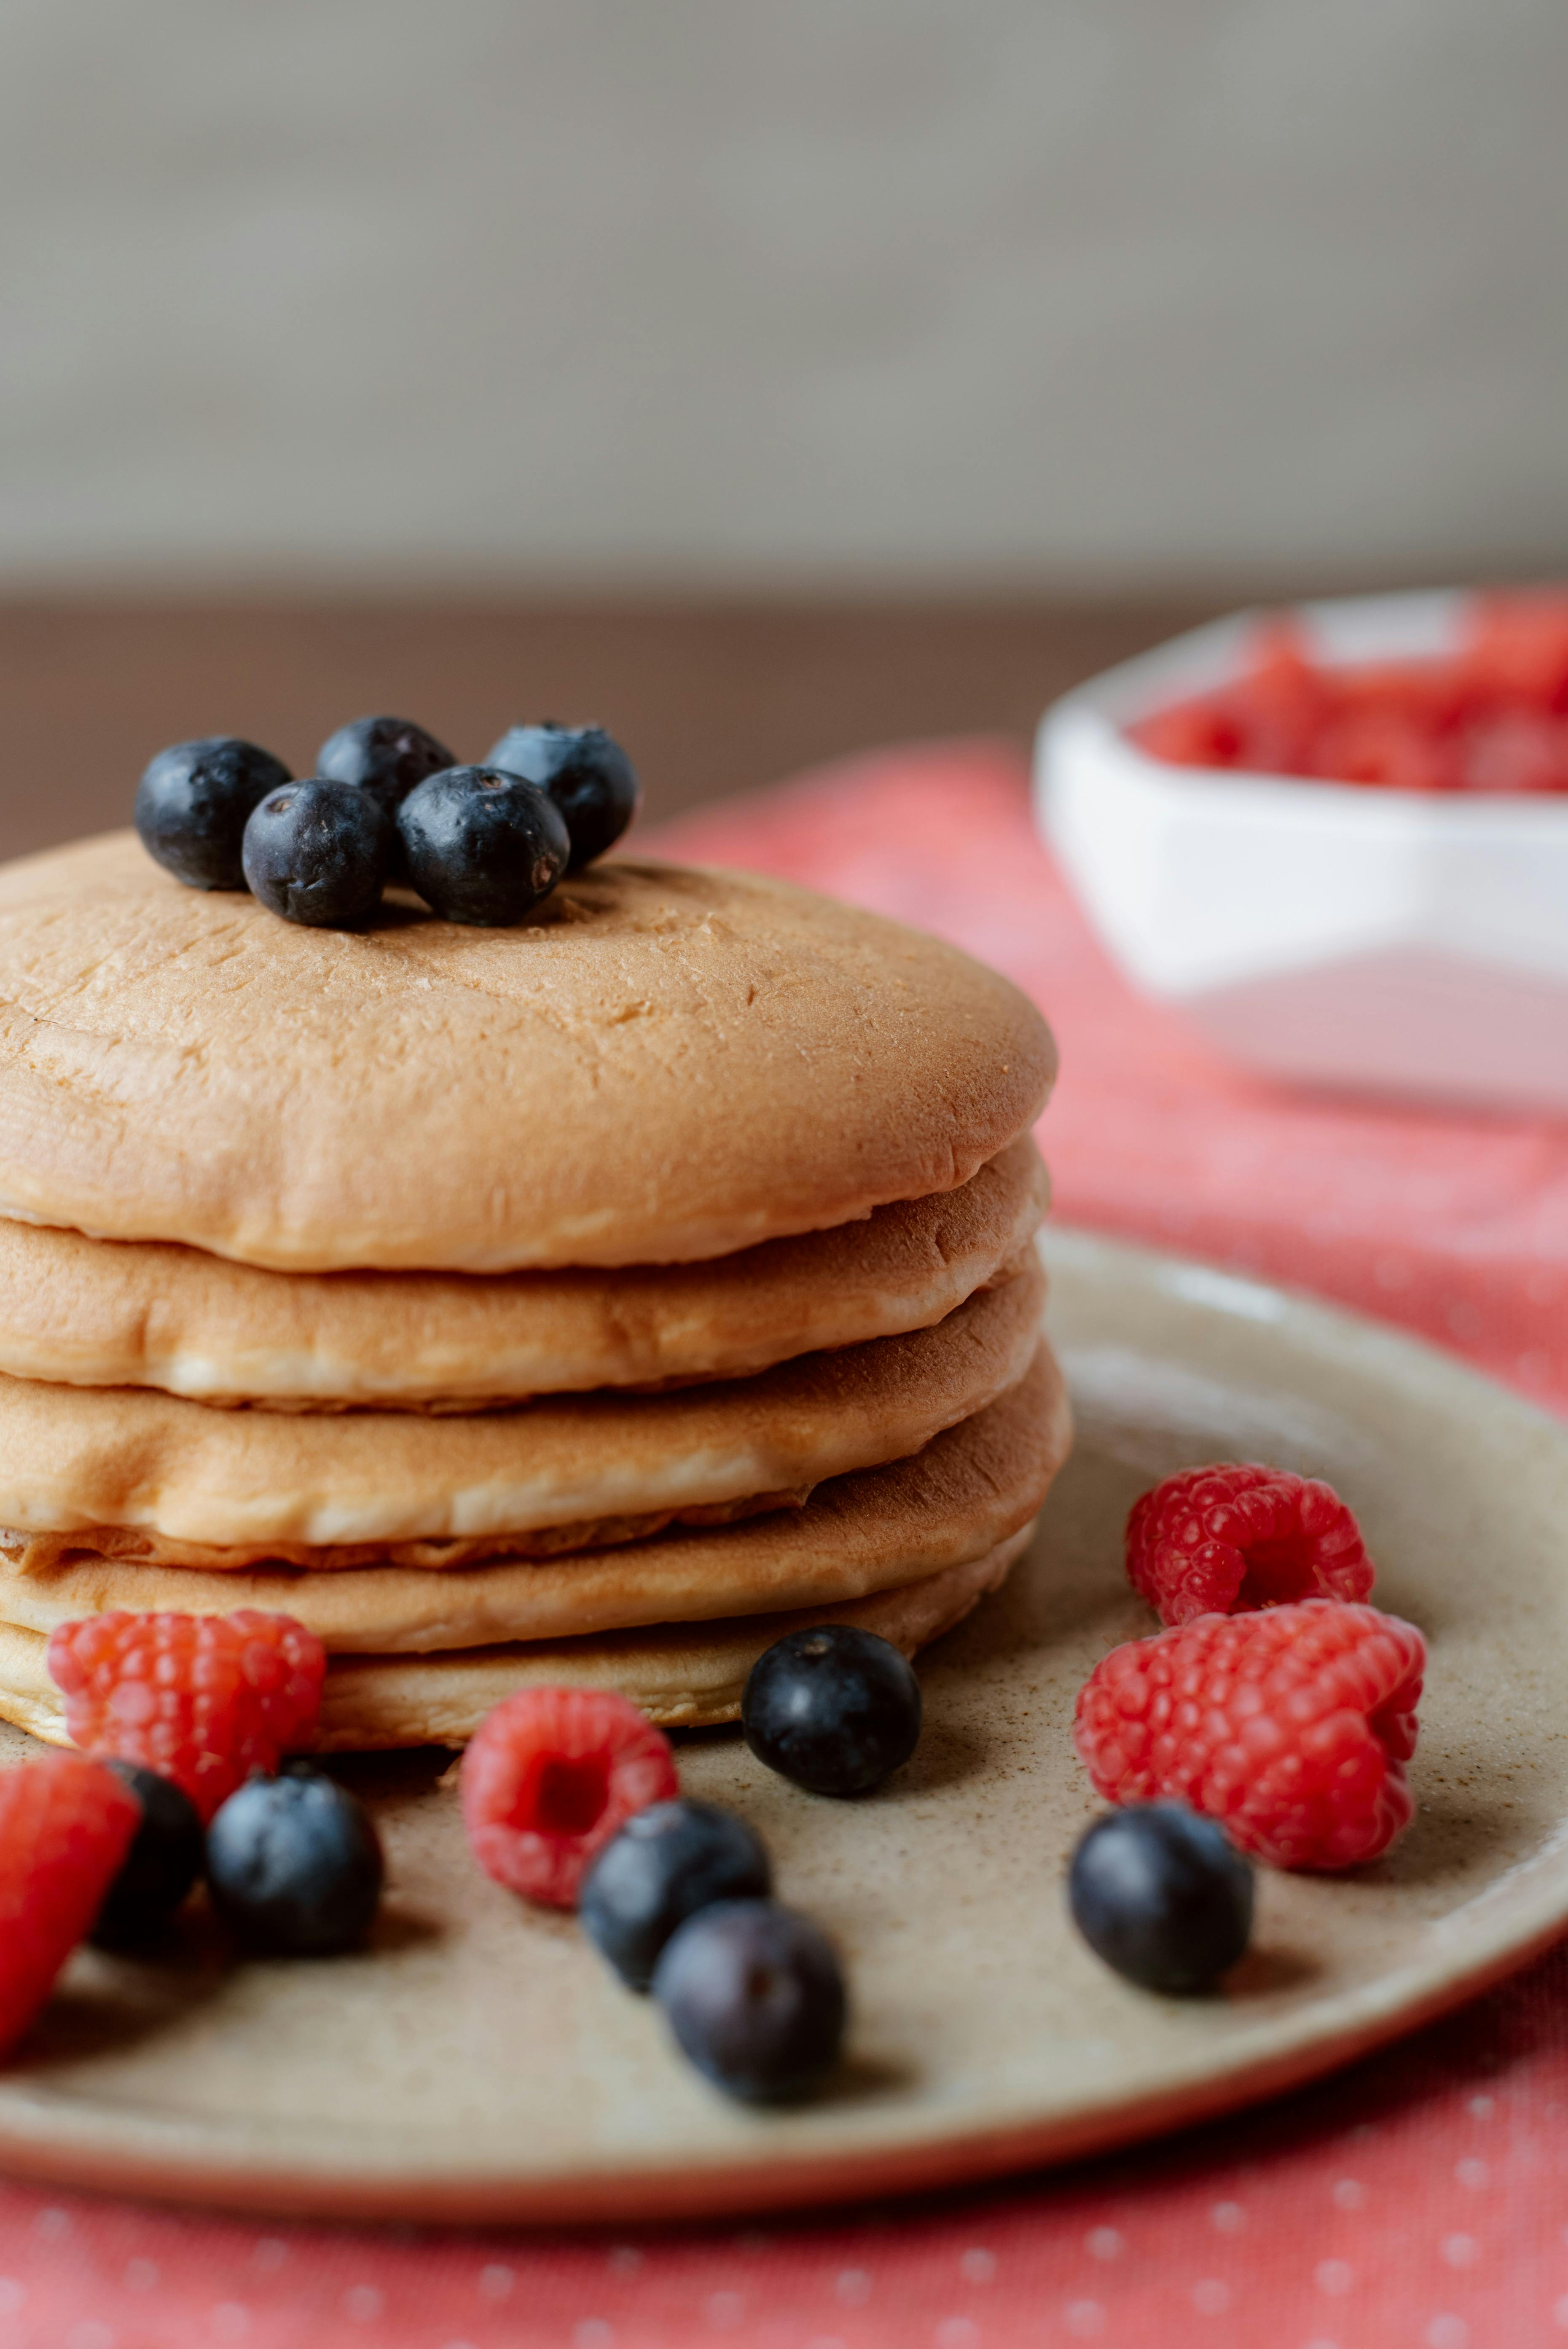 Free Pancakes With Berries on the Plate Stock Photo